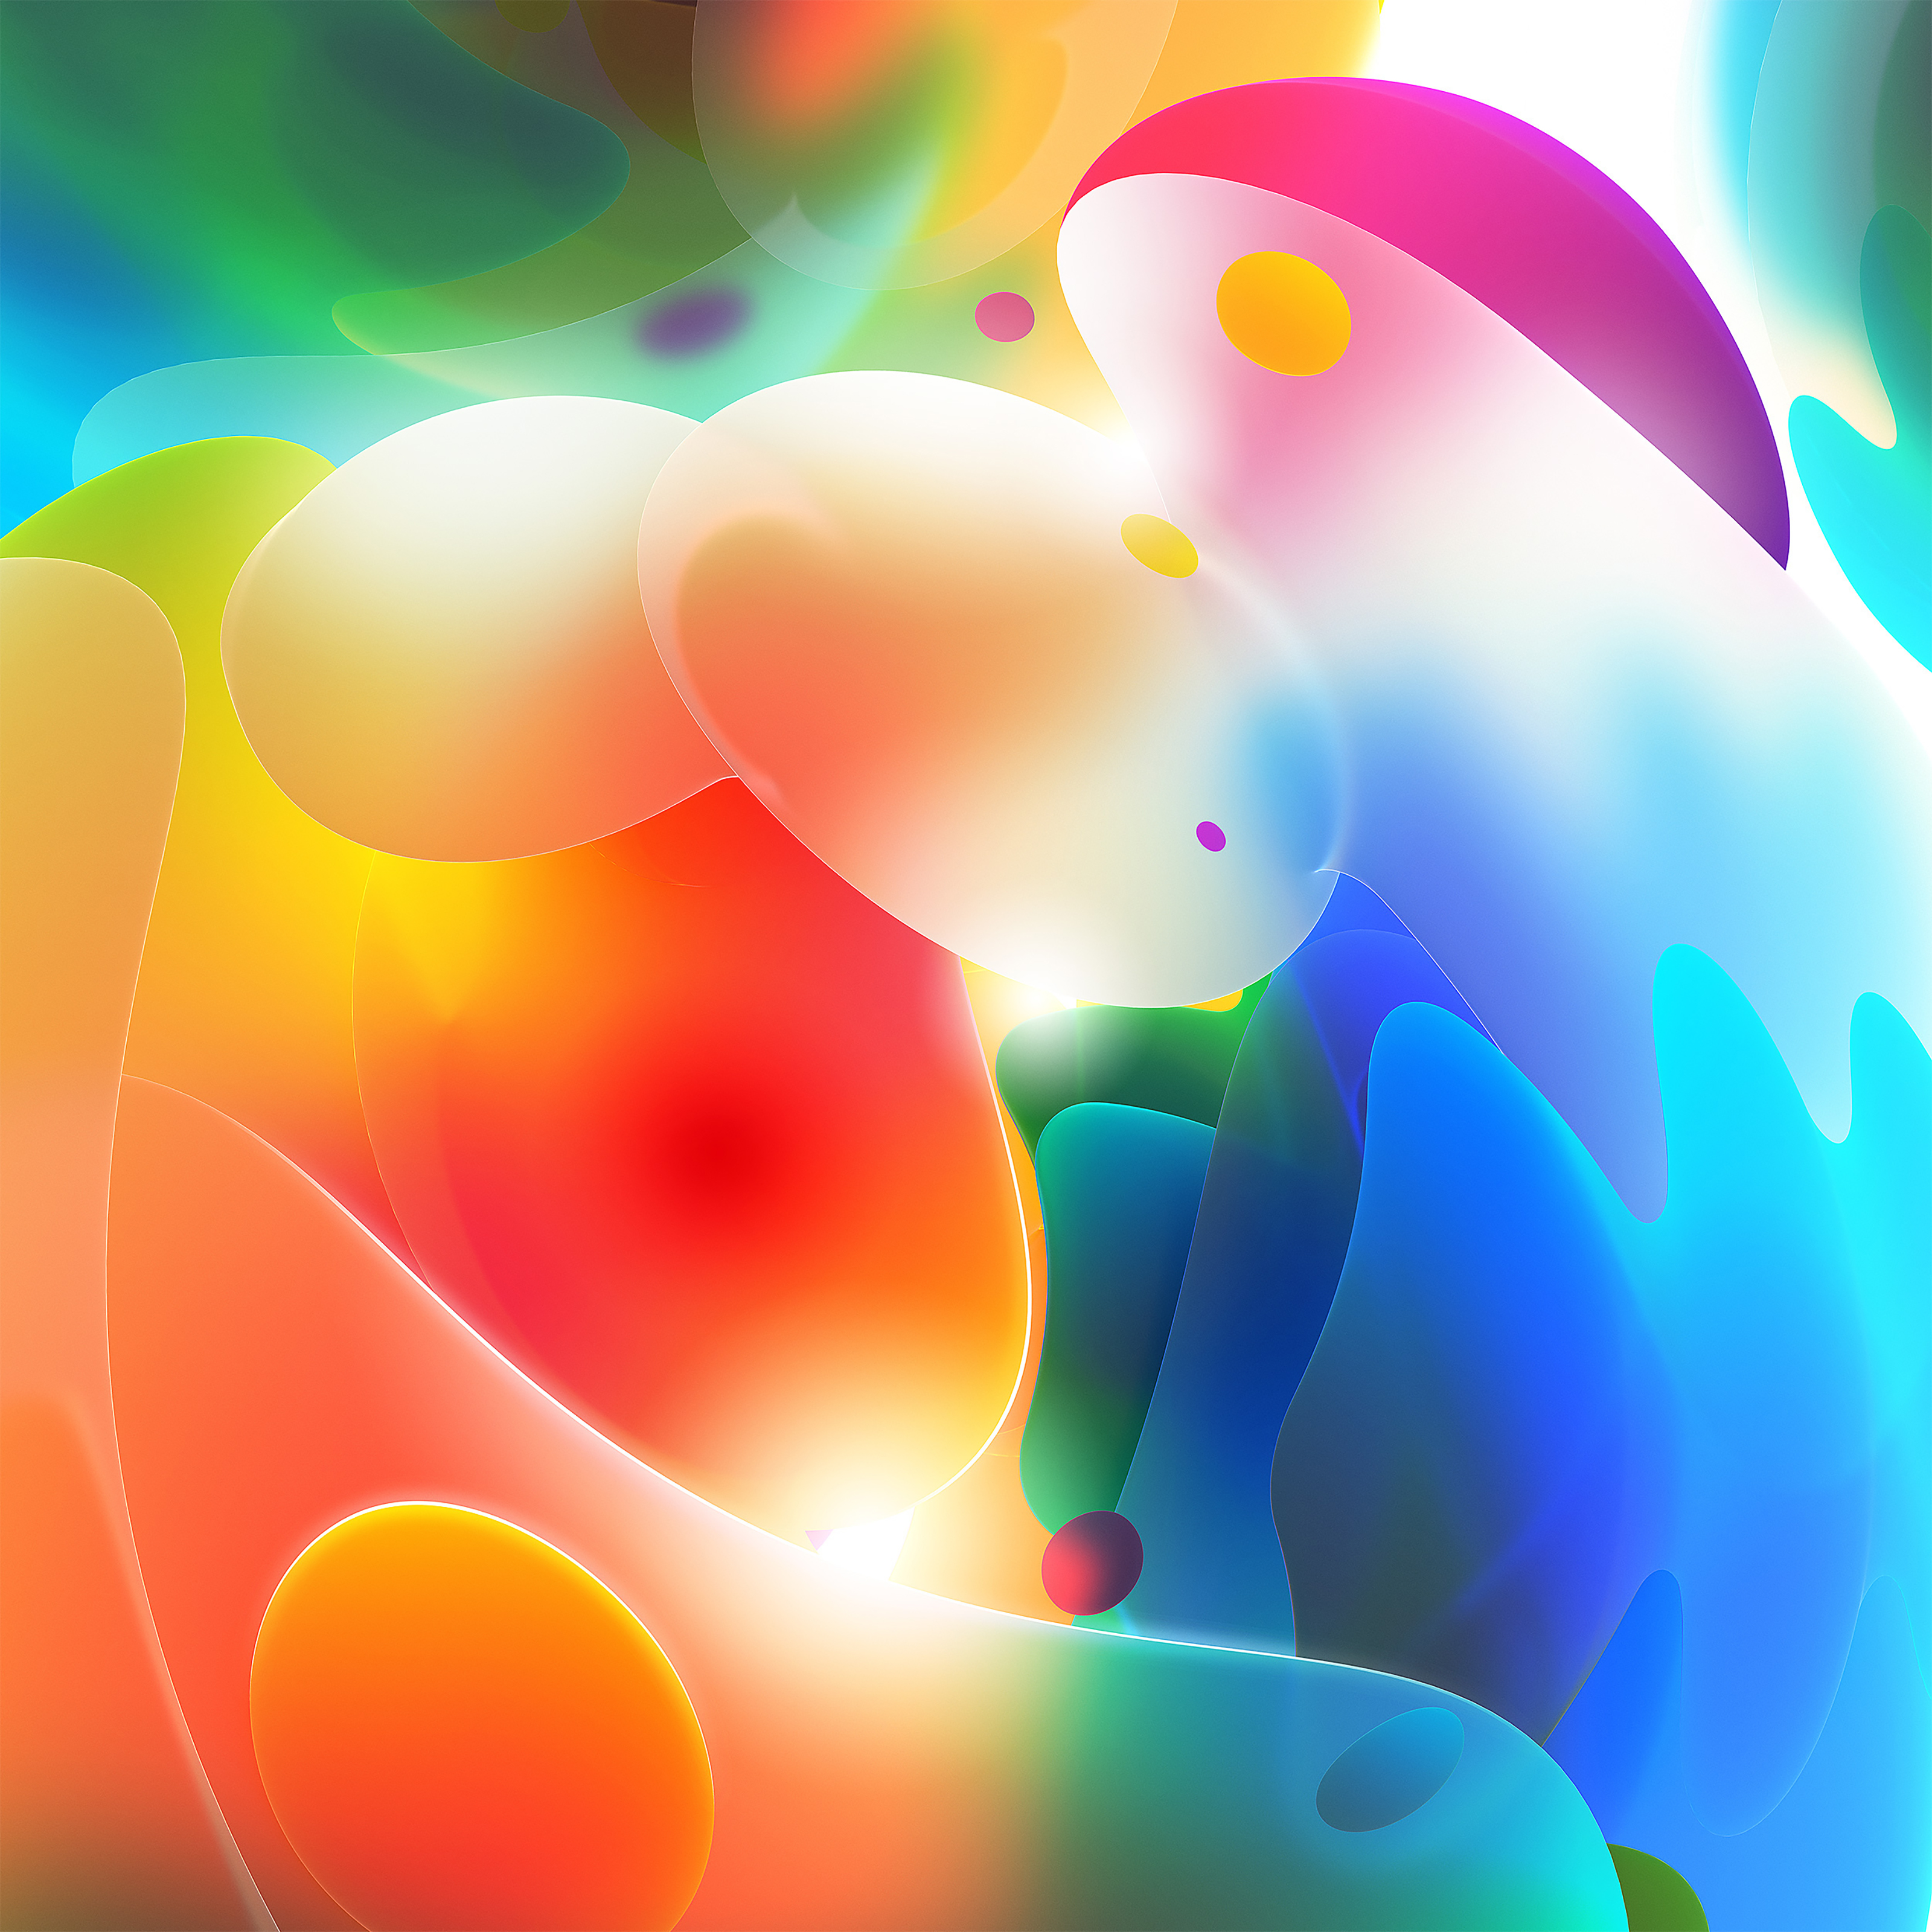 3D Wallpaper 4K, Gradients, Colorful, Abstract, #3567